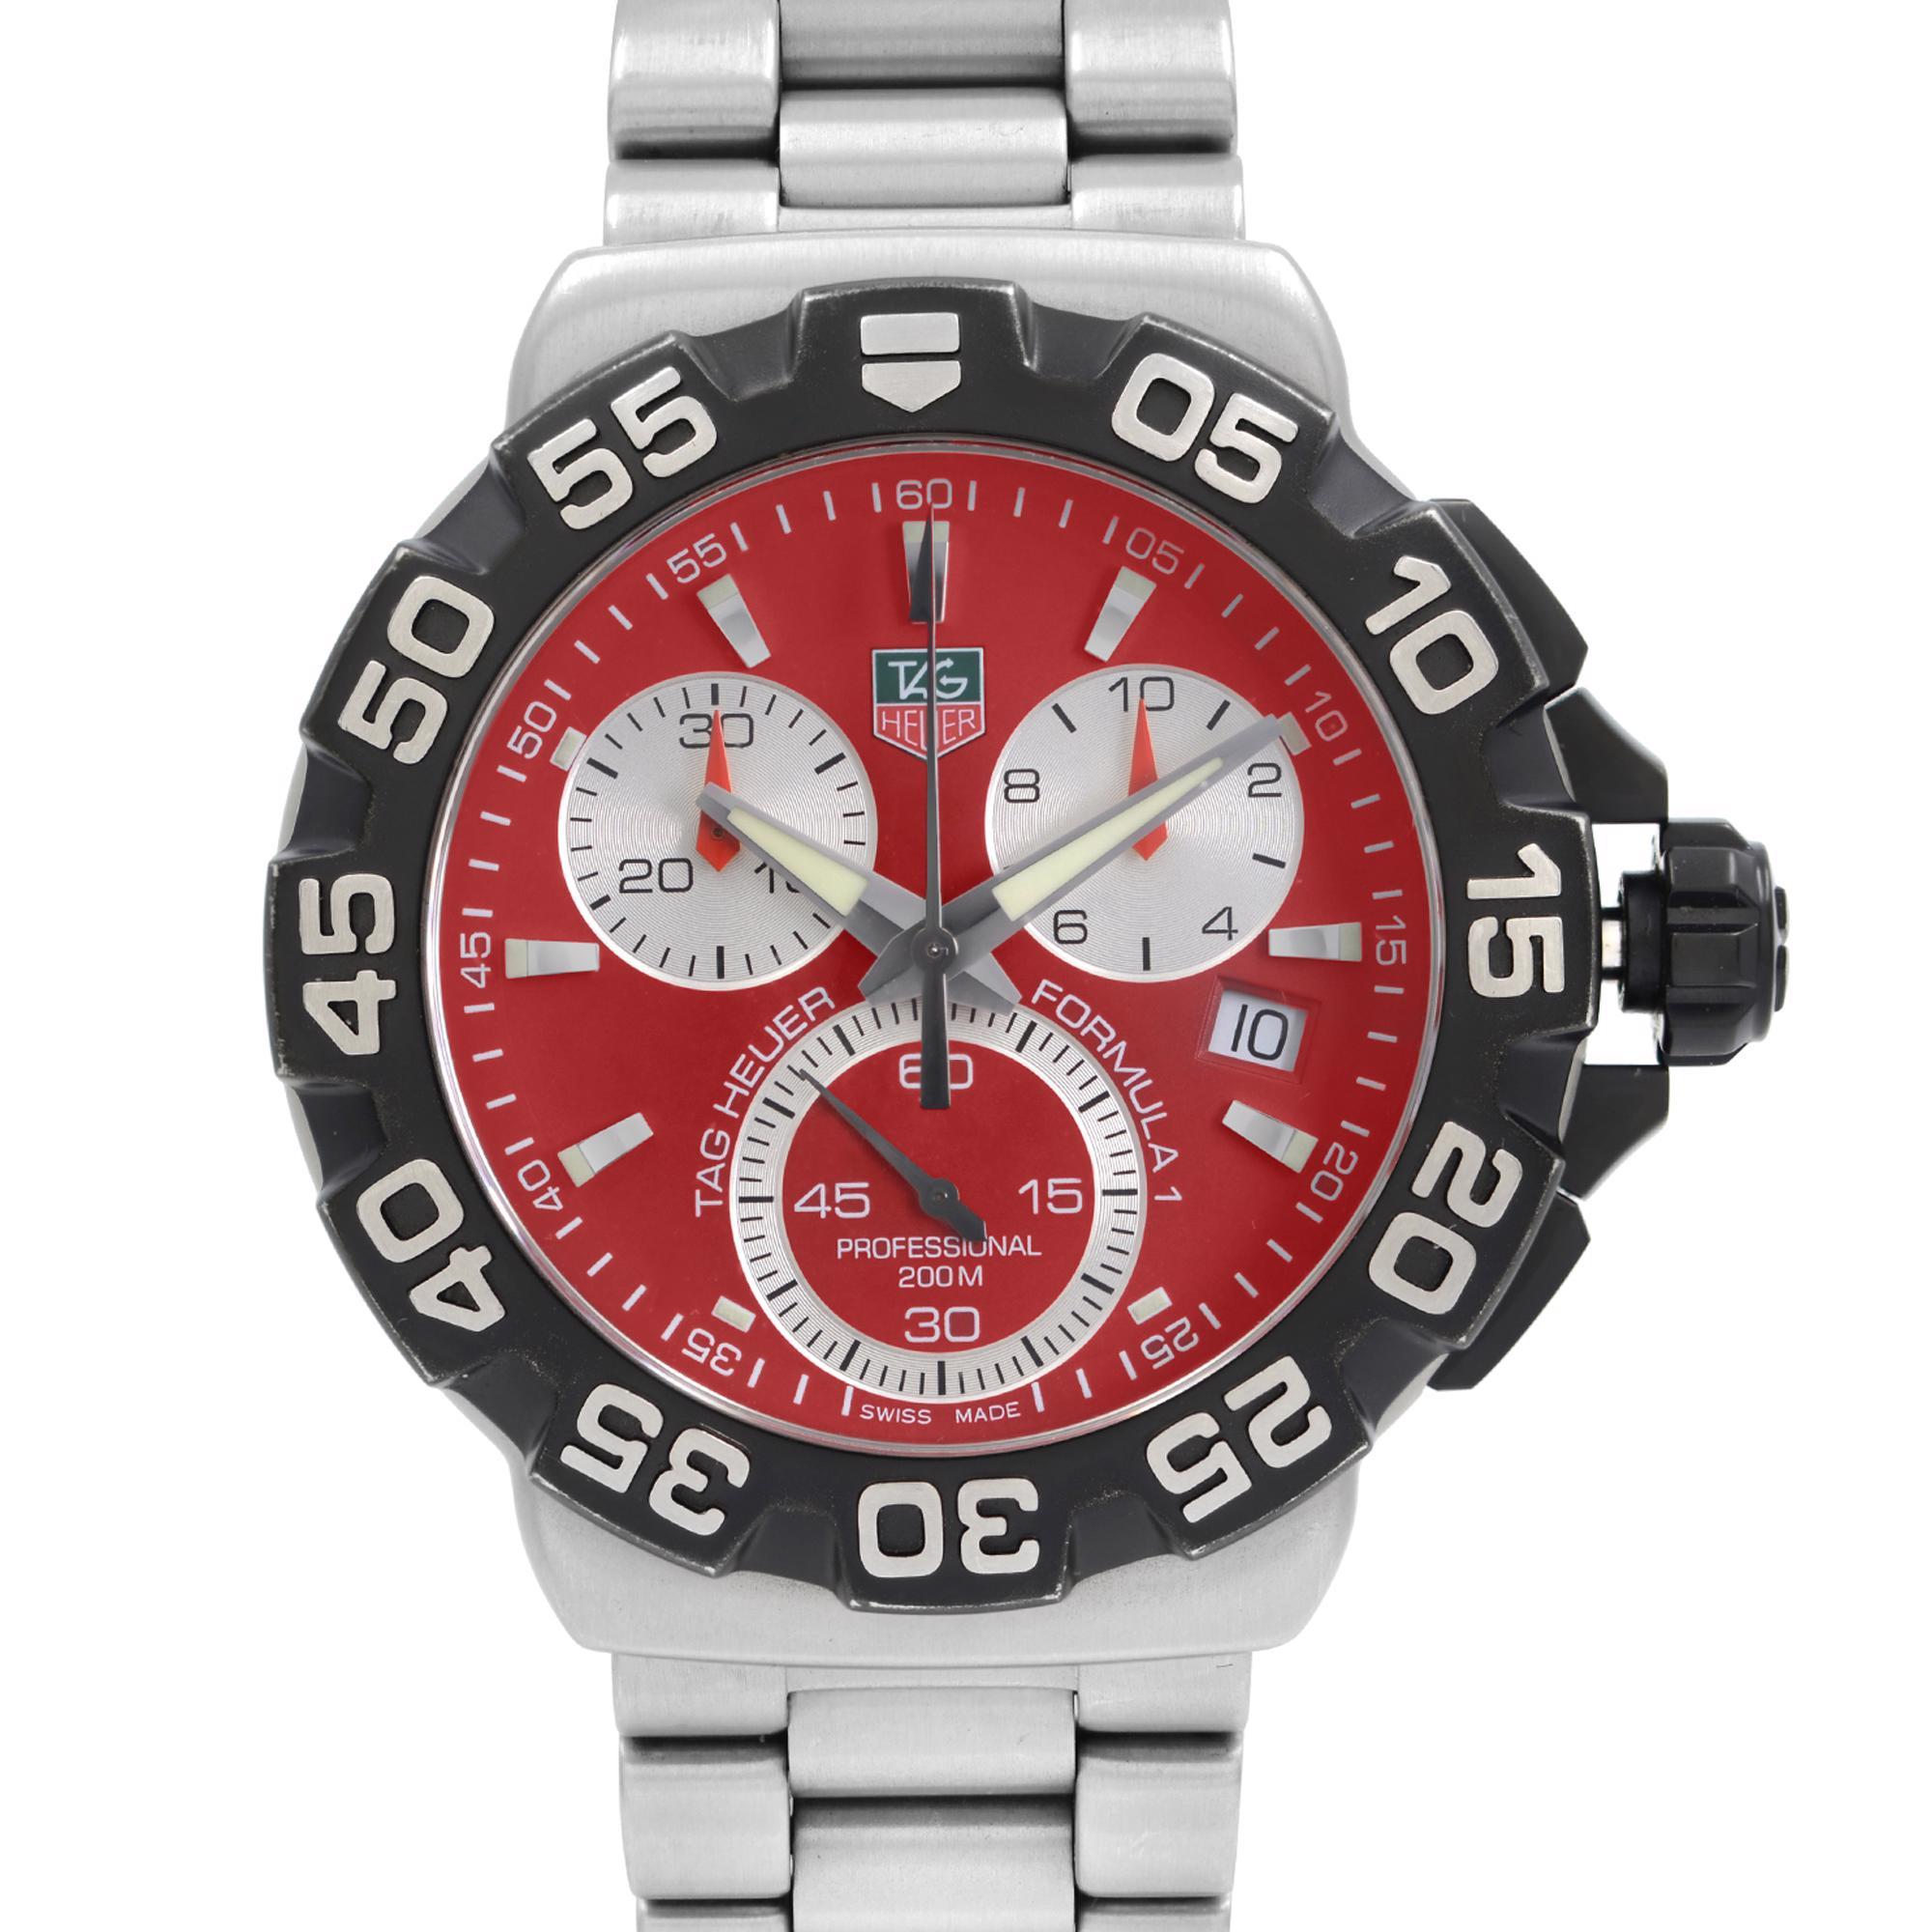 Pre-owned Tag Heuer Formula 1 Chronograph 41mm Stainless Steel Red Dial Mens Quartz Watch CAH1112.BA0850. This Timepiece is powered by Quartz (battery) movement with and Features: Stainless Steel Case Bracelet. Black Titanium Carbide Coated